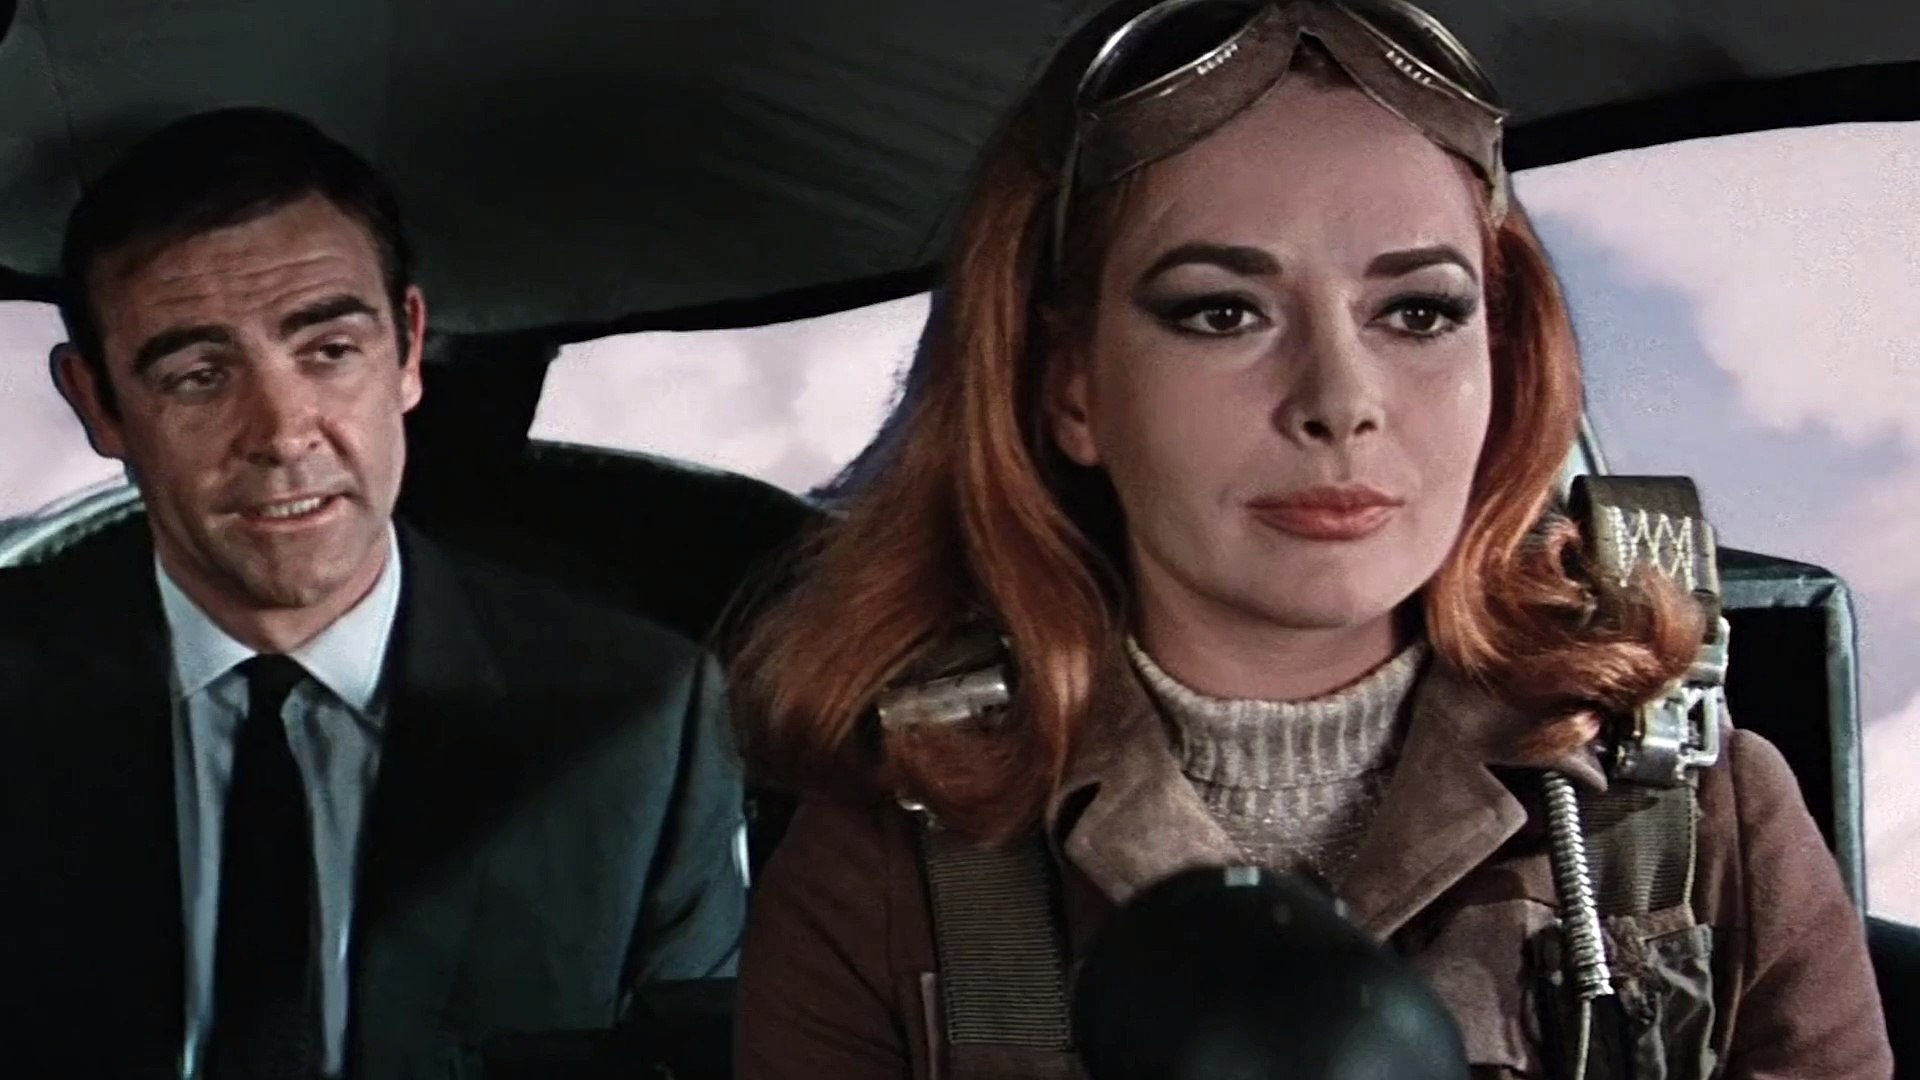 James Bond You Only Live Twice Movie 1967 Clip With Sean Connery And Karin Dor Helga Brandt Abandons Bond Mid Air Video Dailymotion